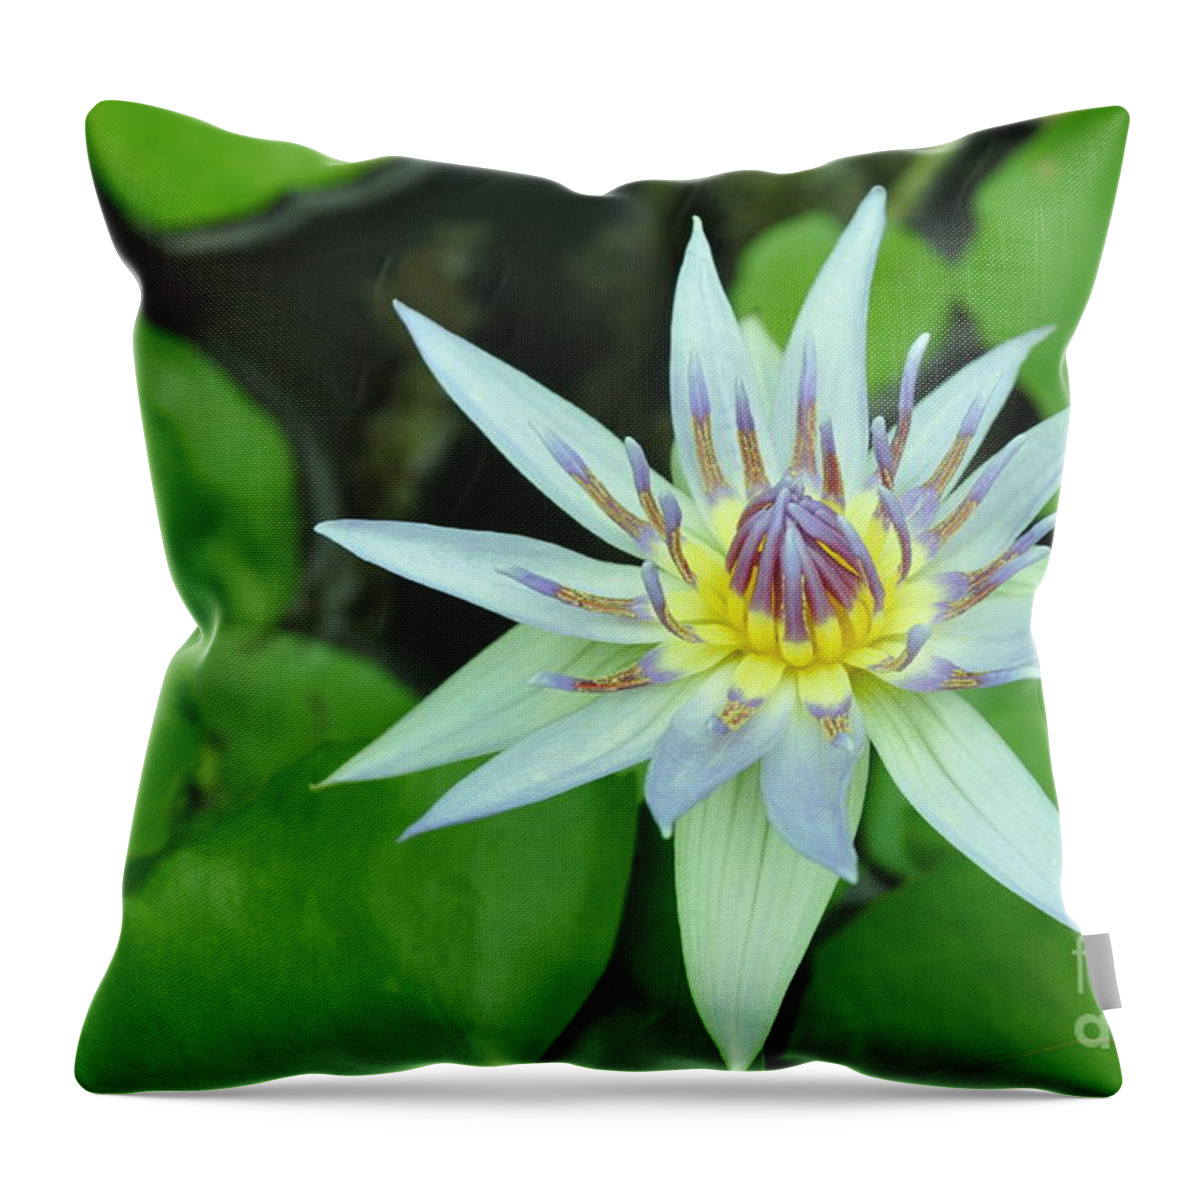 Water Lillies Throw Pillow featuring the photograph Water Lily 3 by Allen Beatty